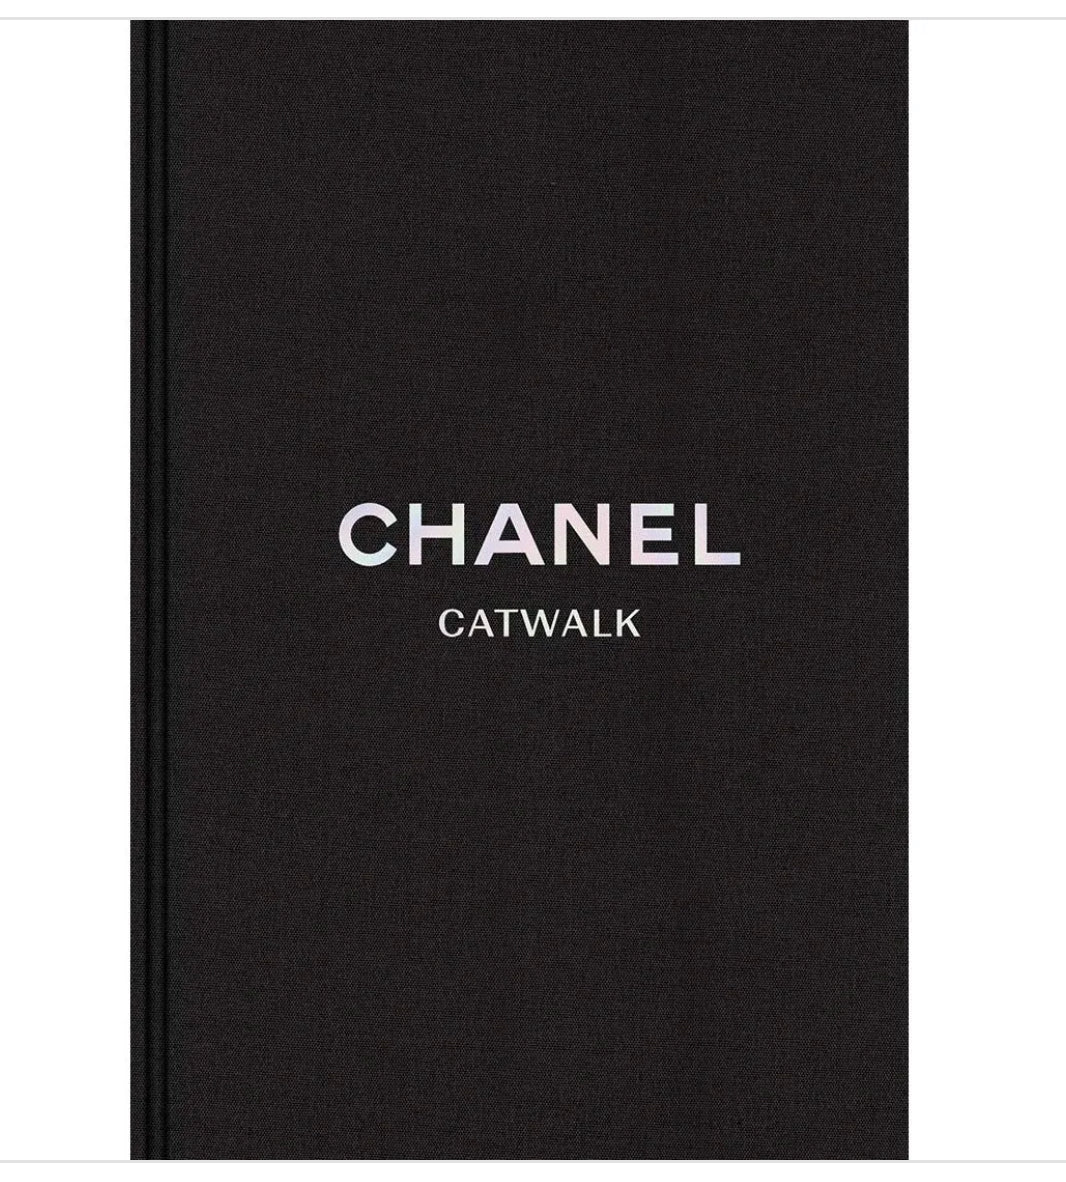 CHANEL WATCH CATALOG WRISTWATCH DESIGN J12 2009 HARDCOVER BOOK MENS  AUTOMATIC